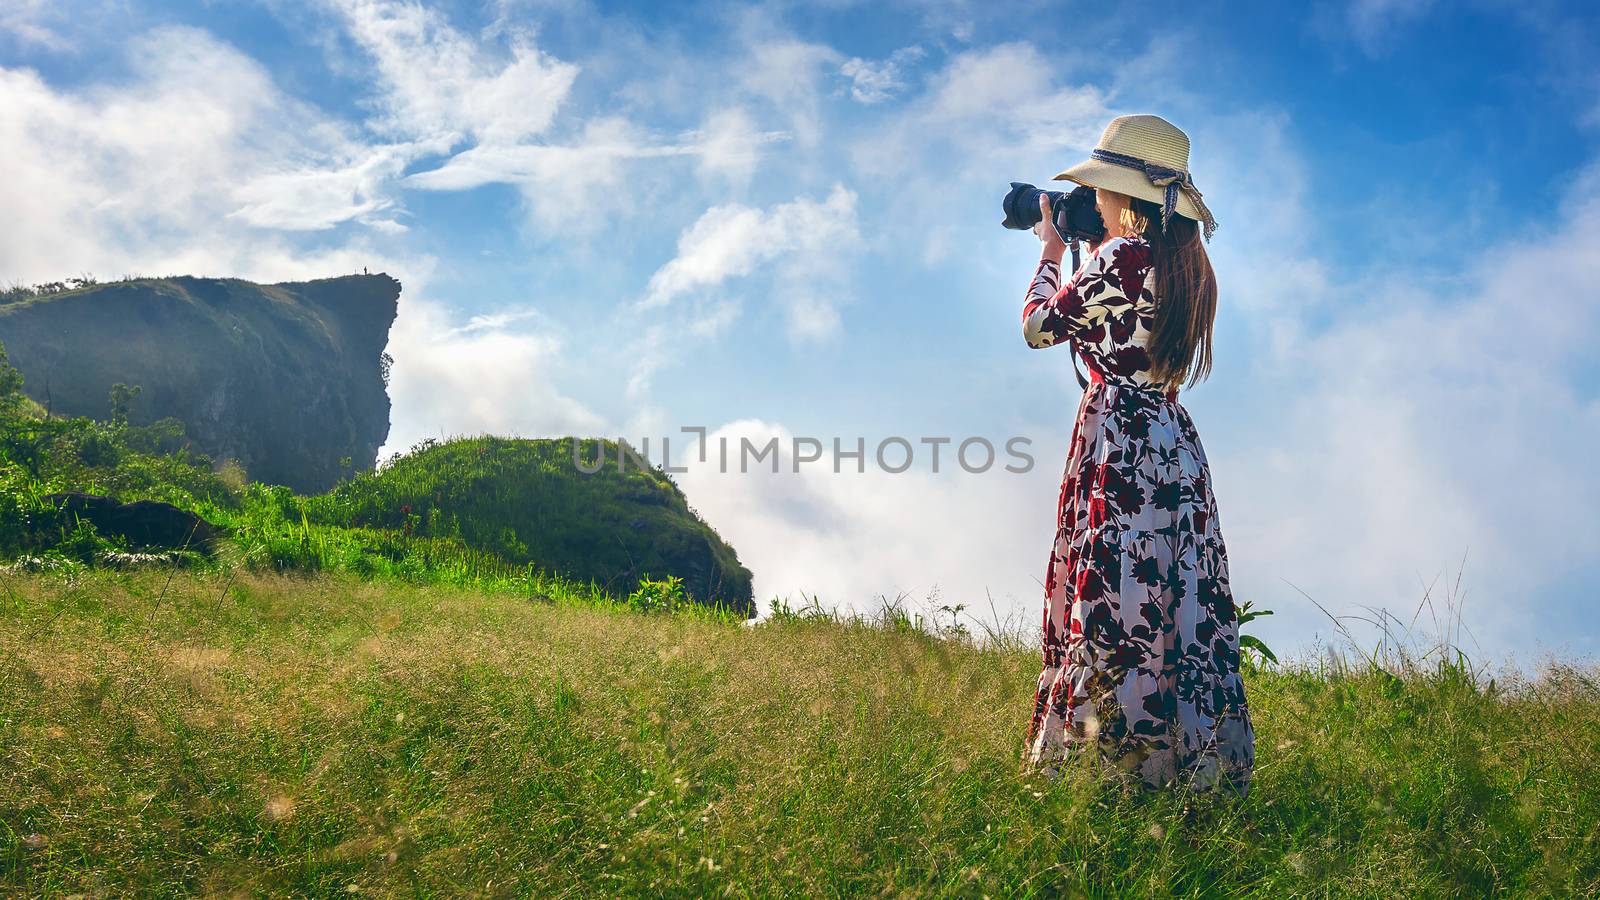 Woman standing on meadow and holding camera take photo at Phu Chi Fa mountains in Chiangrai, Thailand. Travel concept. Vintage tone. by gutarphotoghaphy